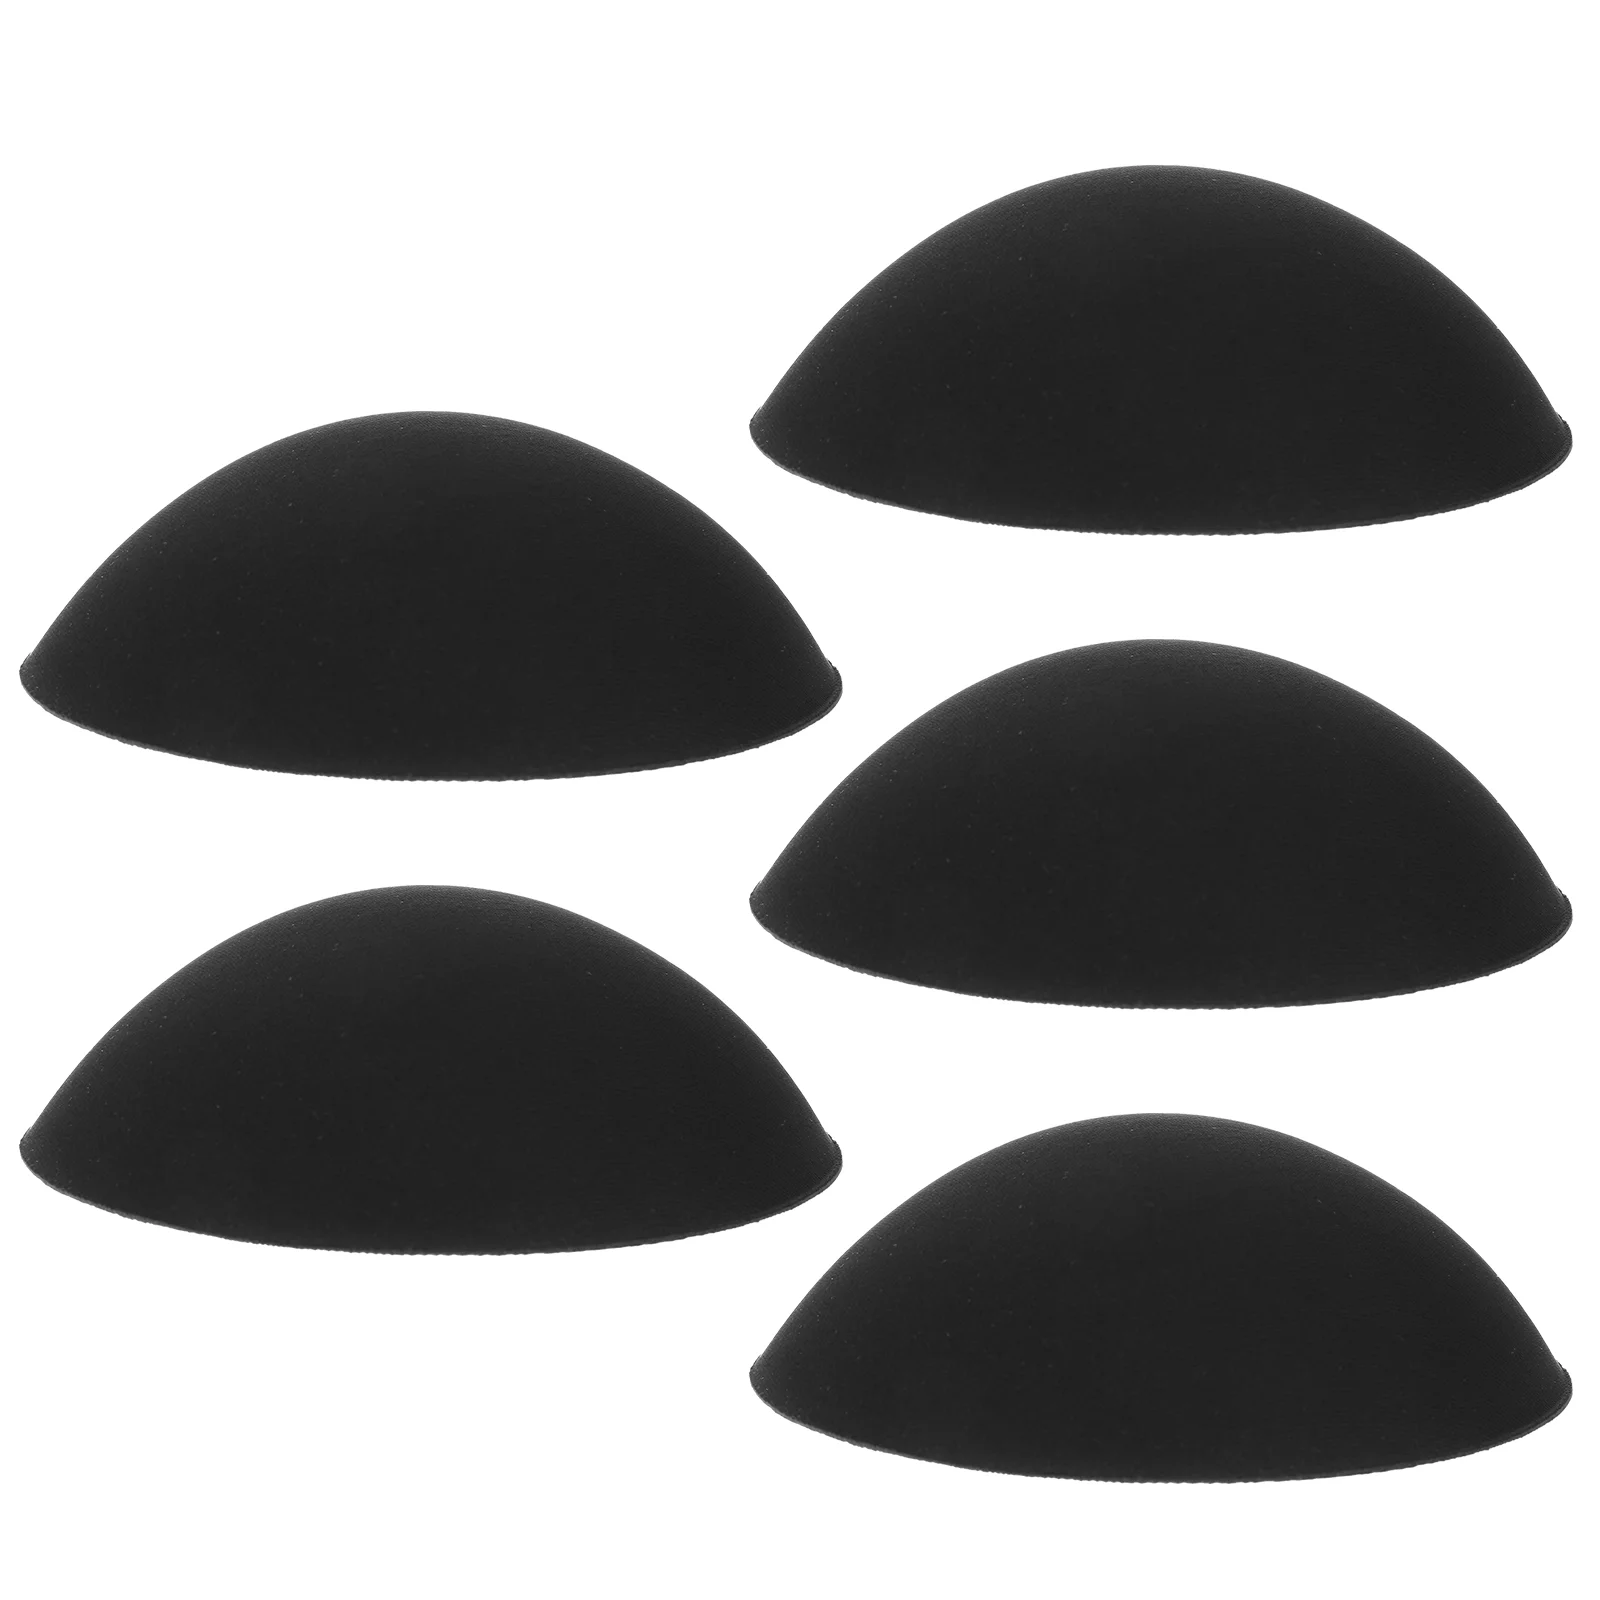 

5 Pairs Removable Pads Inserts Pads Round Sew In Cups For Swimsuits Dresses Sports Black